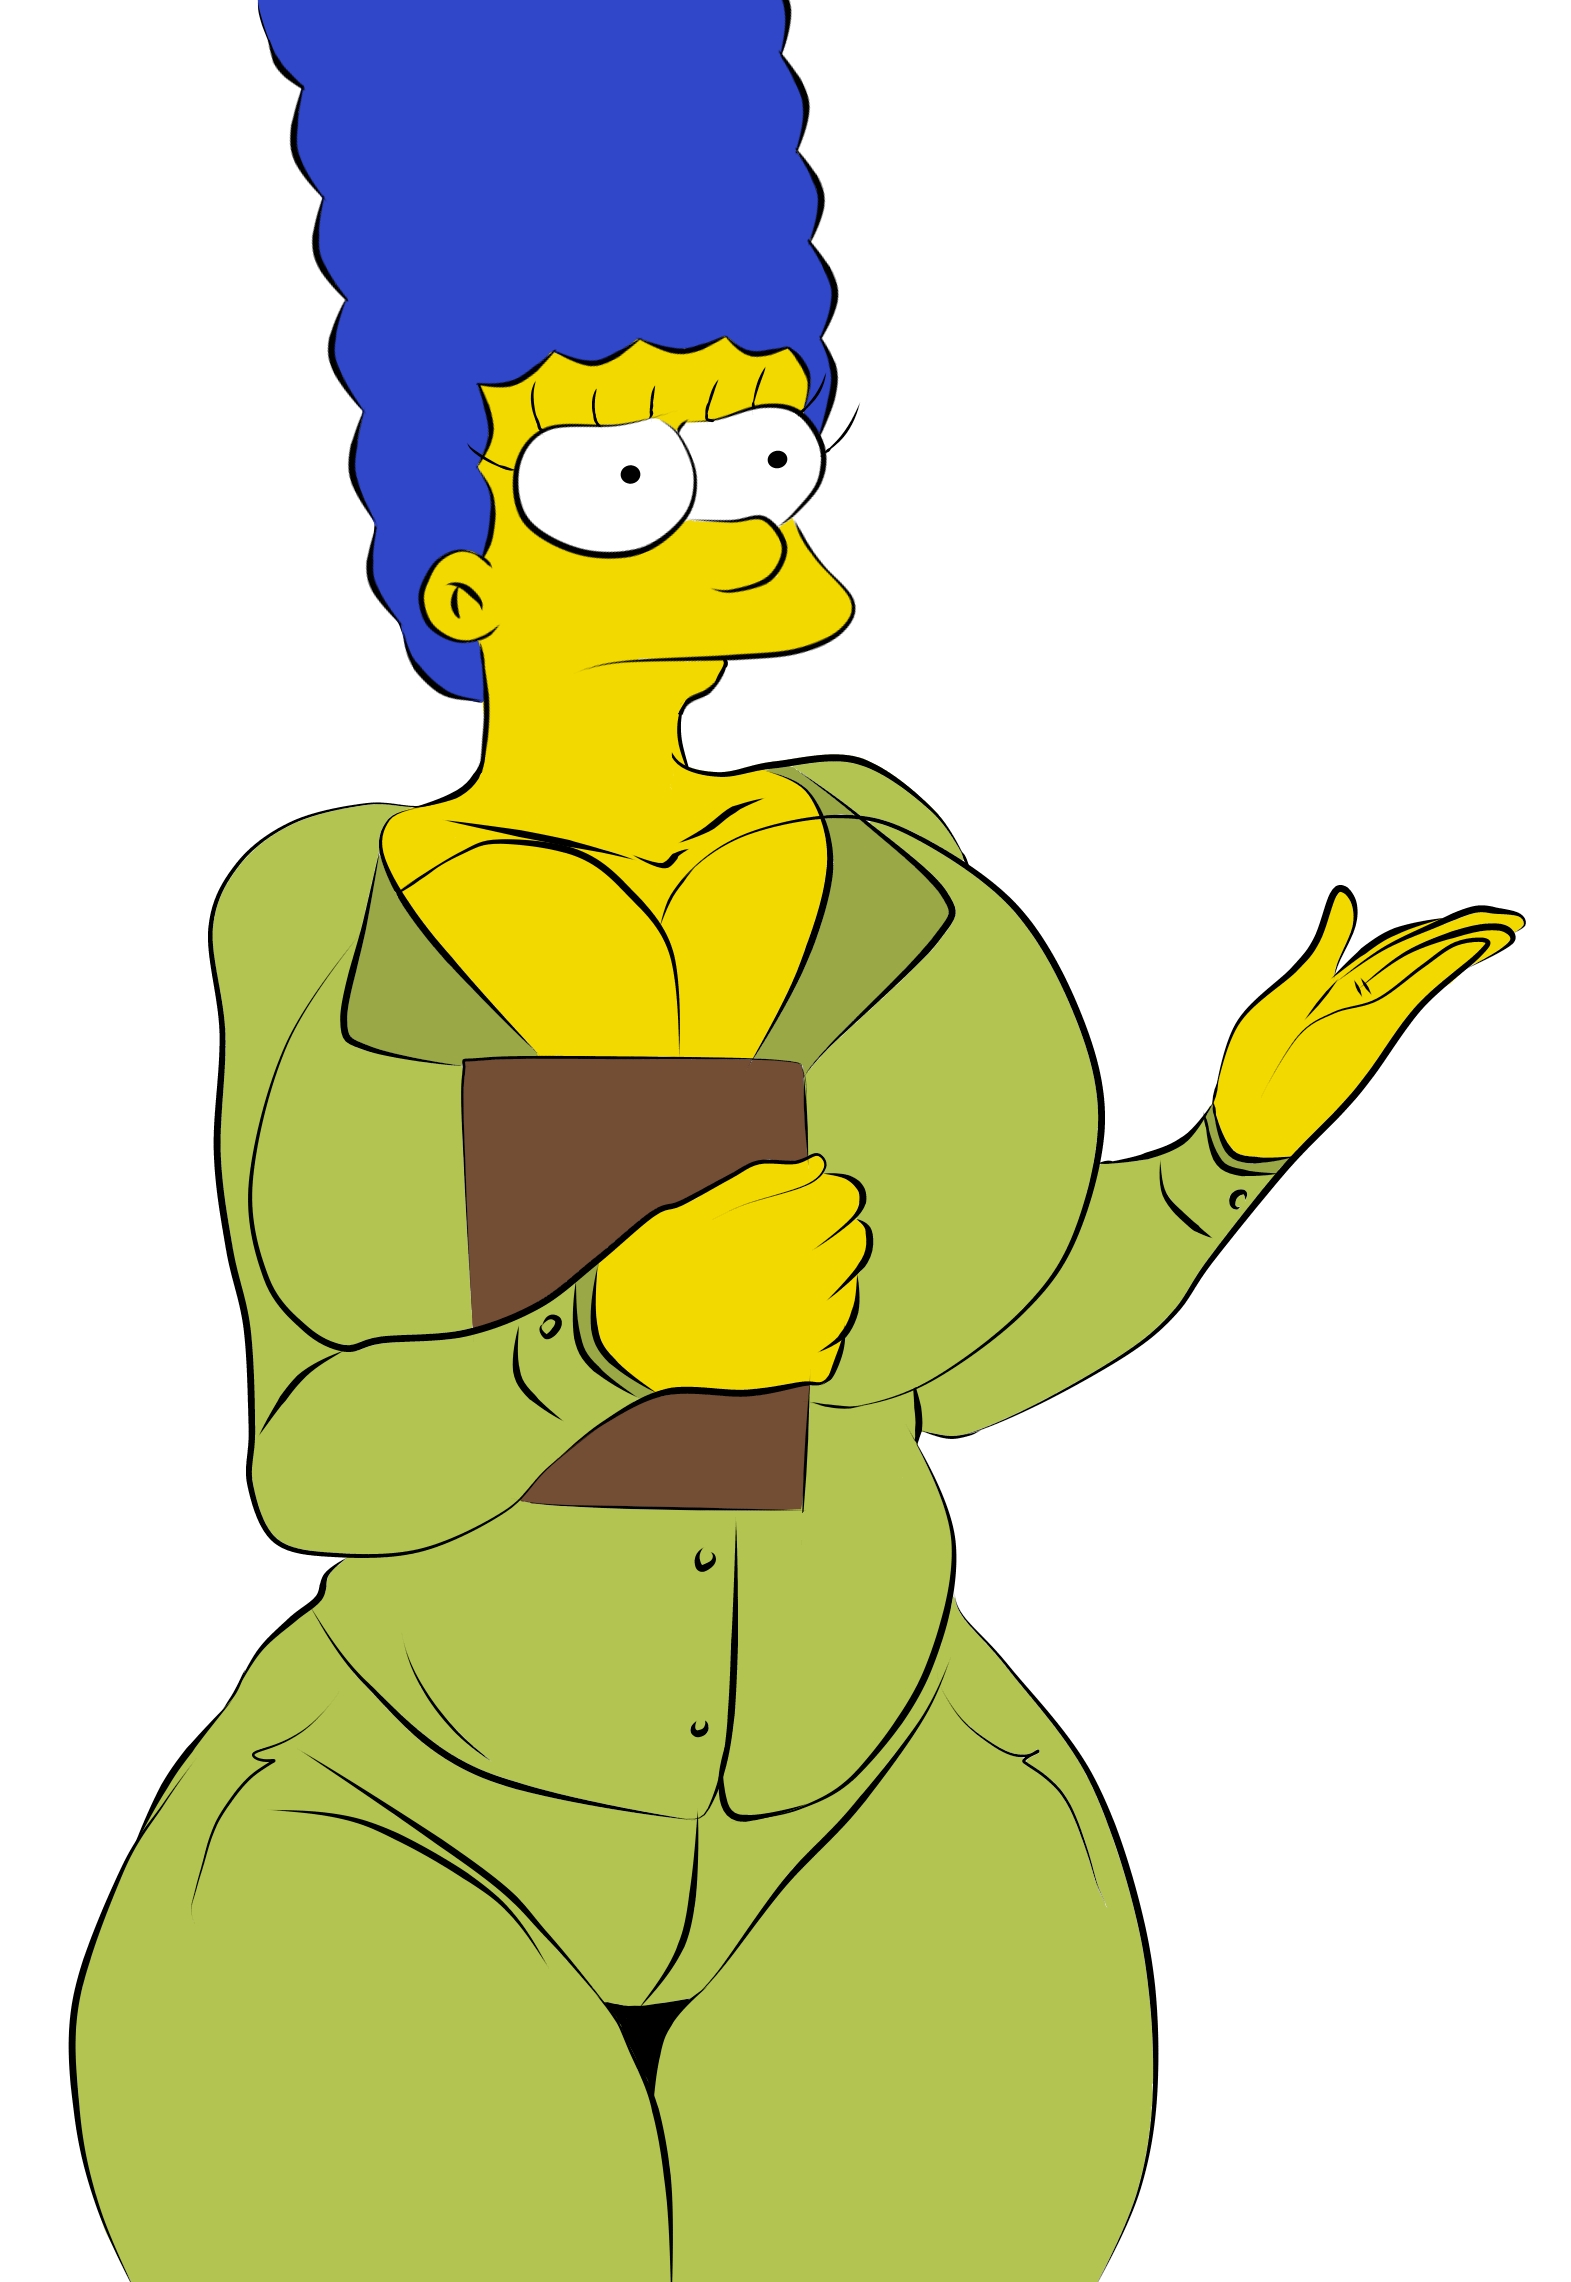 marge simpson, the simpsons, androidspaints, big ass, big breasts, milf.